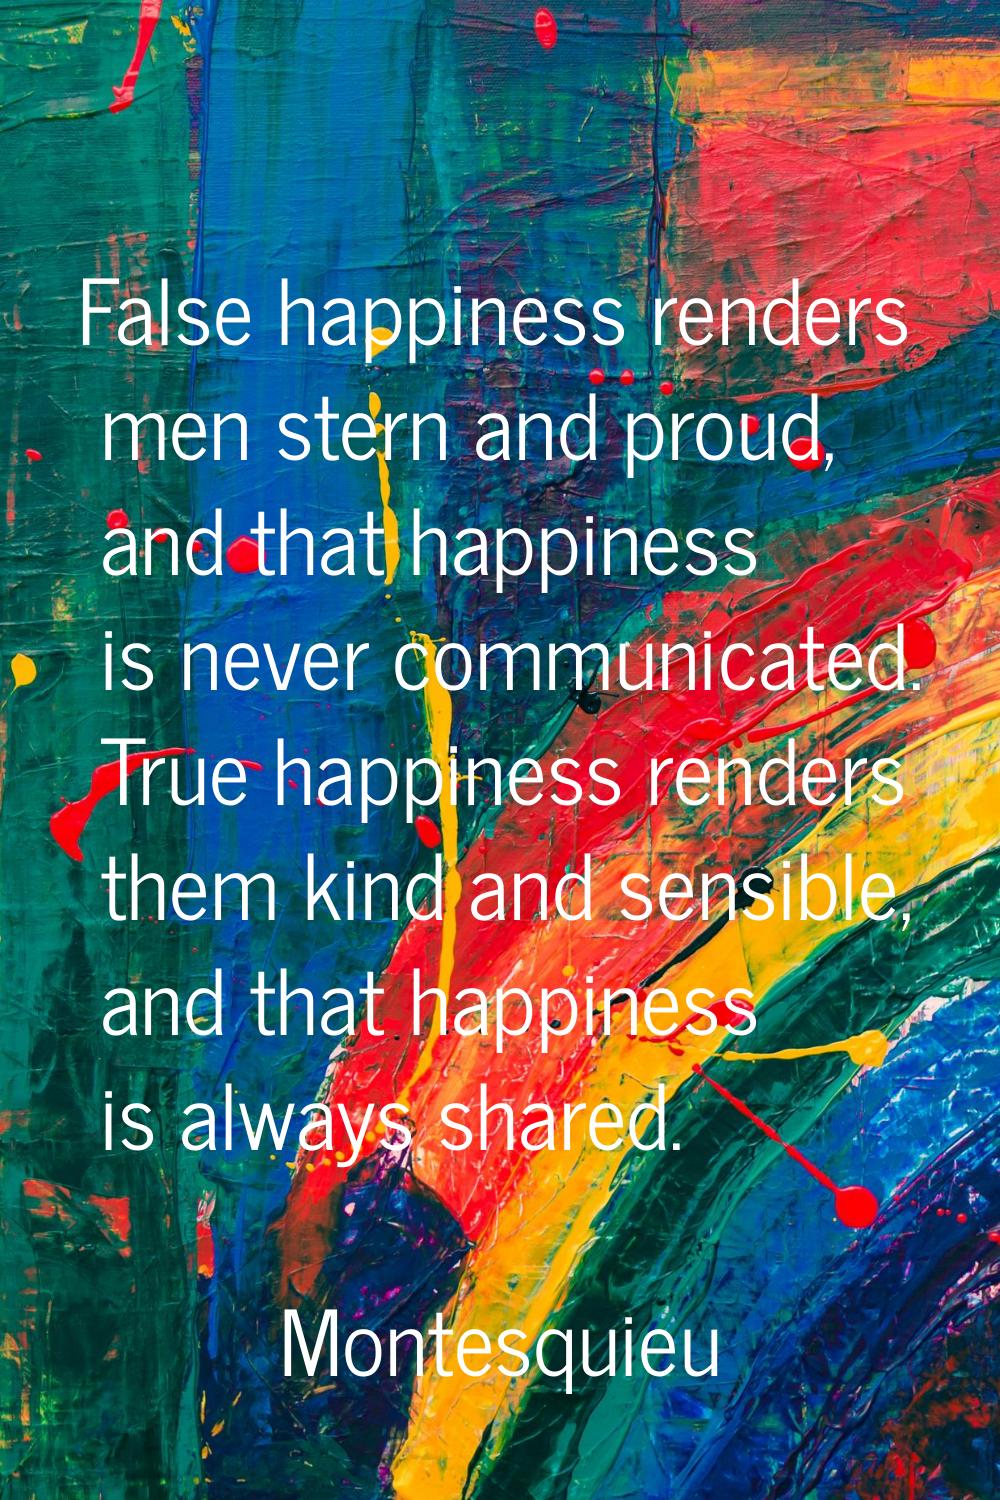 False happiness renders men stern and proud, and that happiness is never communicated. True happine